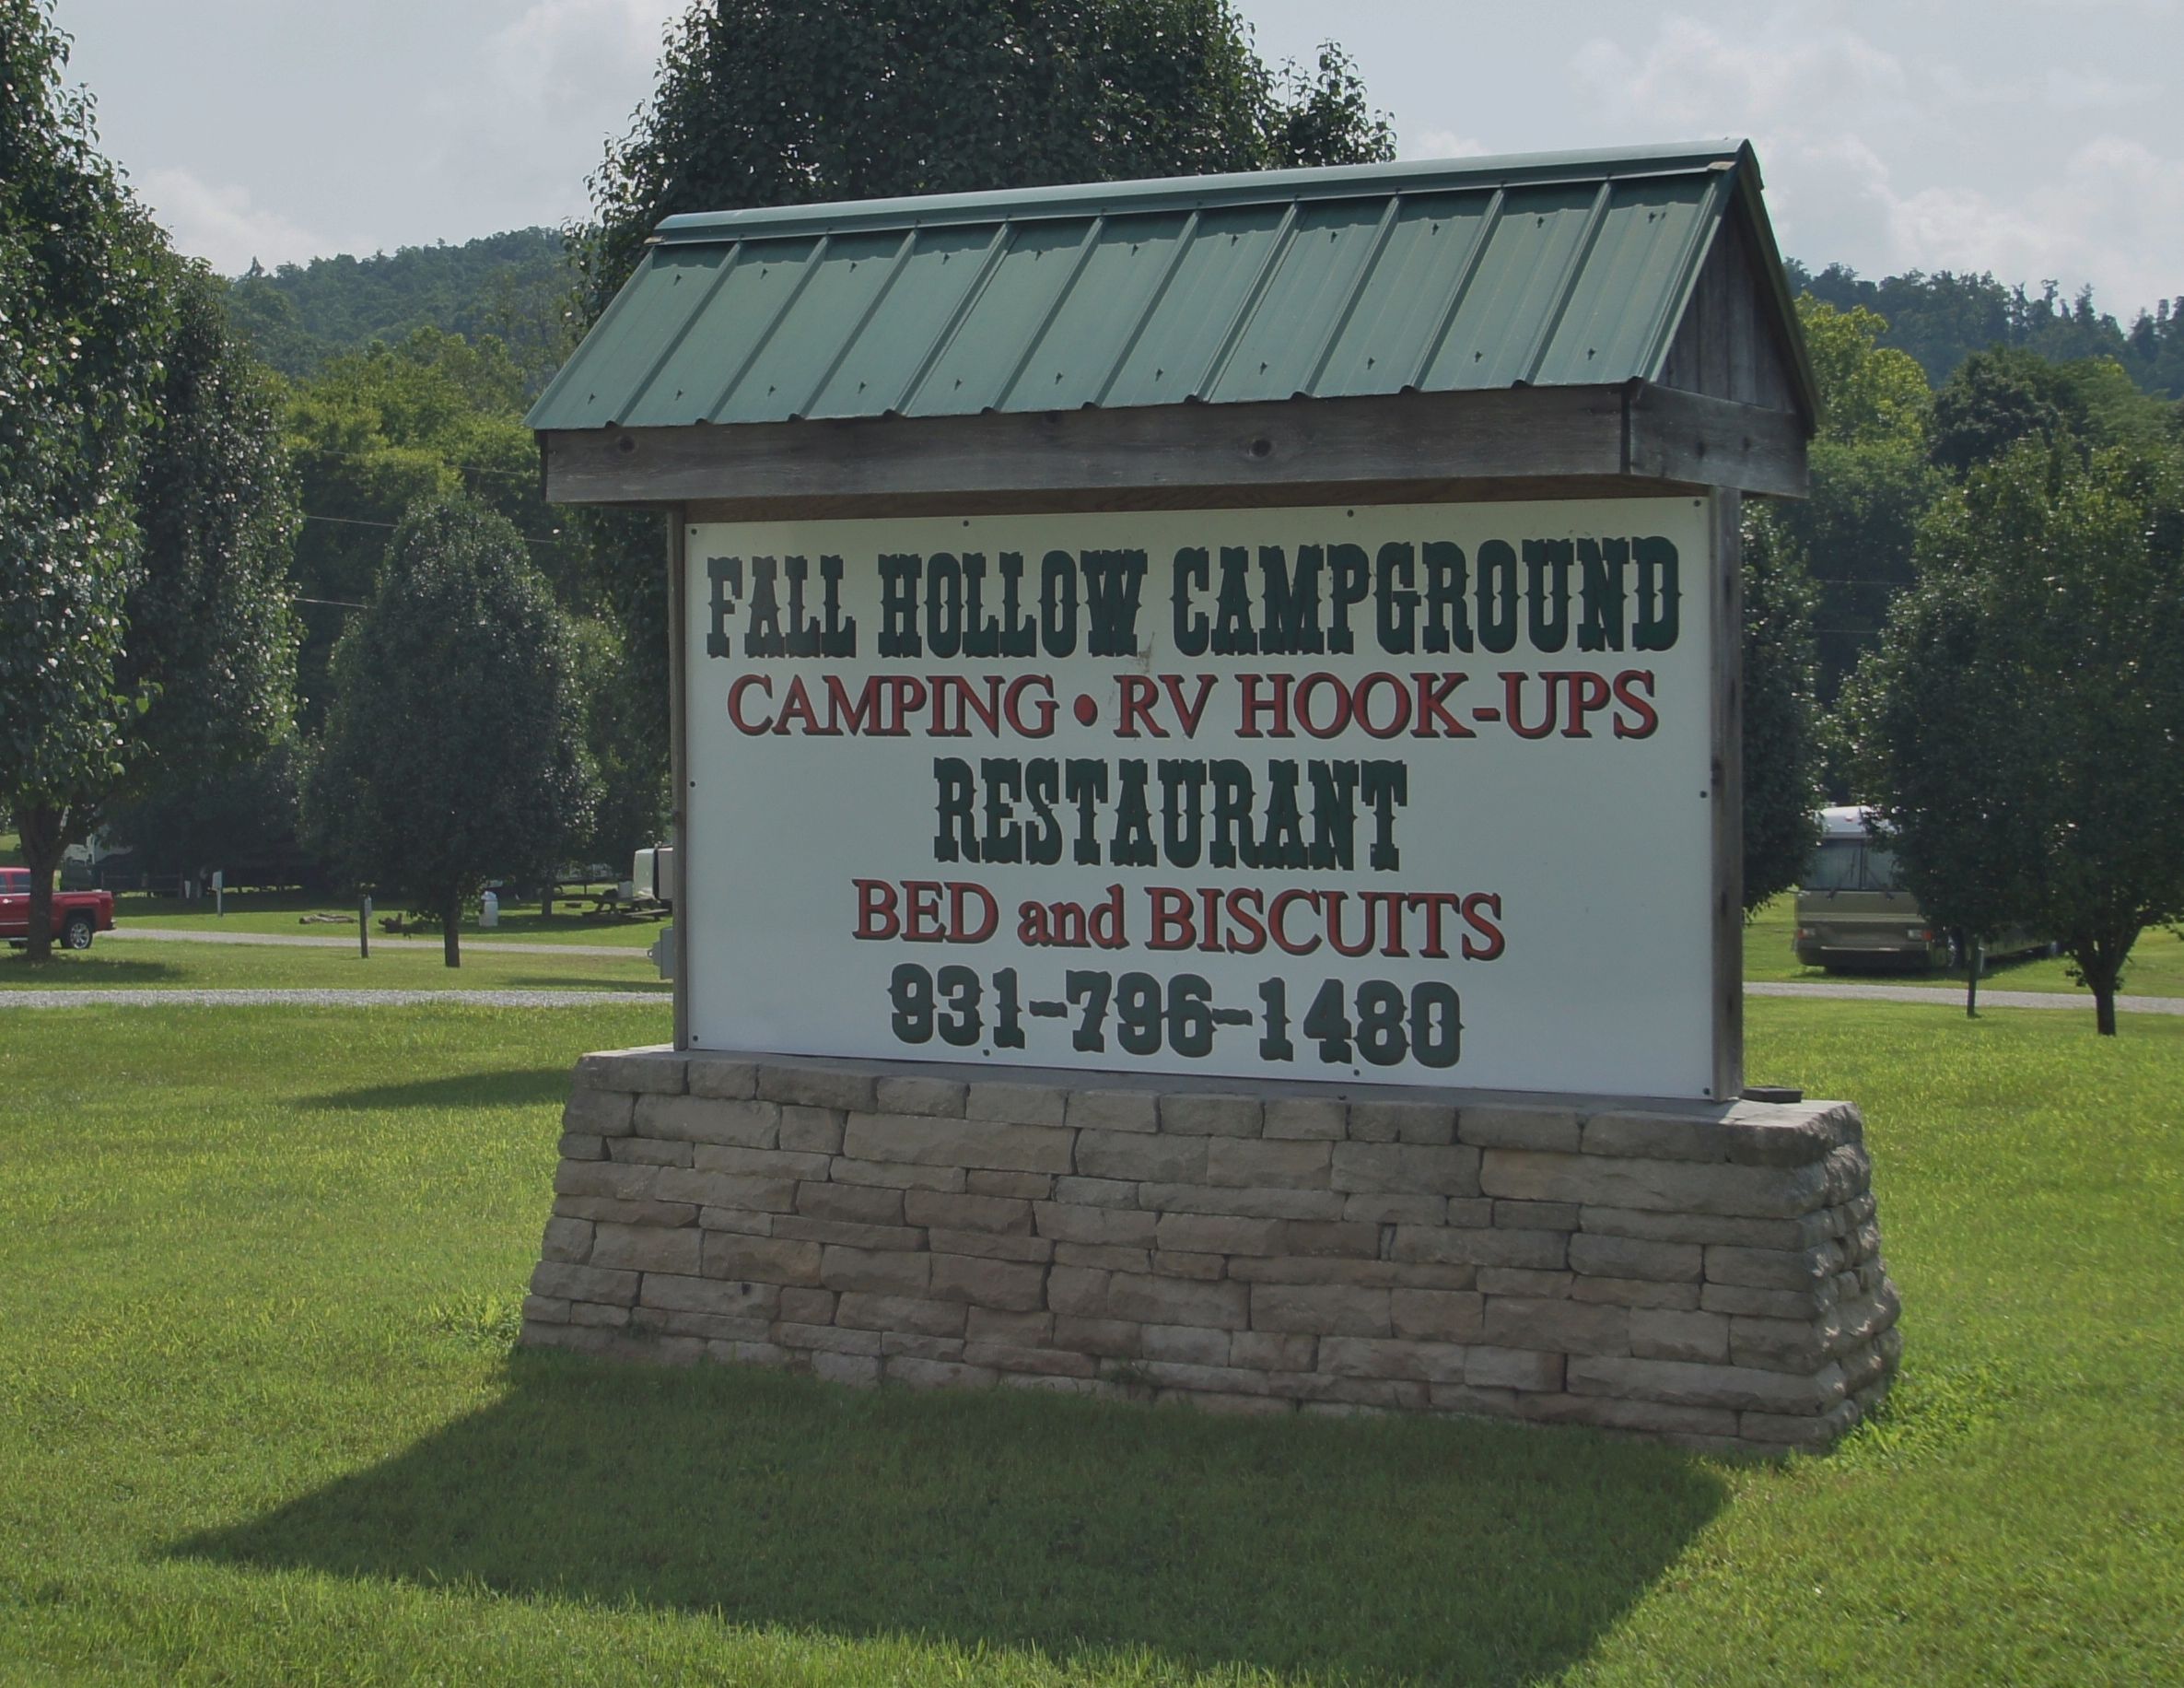 Entrance to Fall Hollow Campground